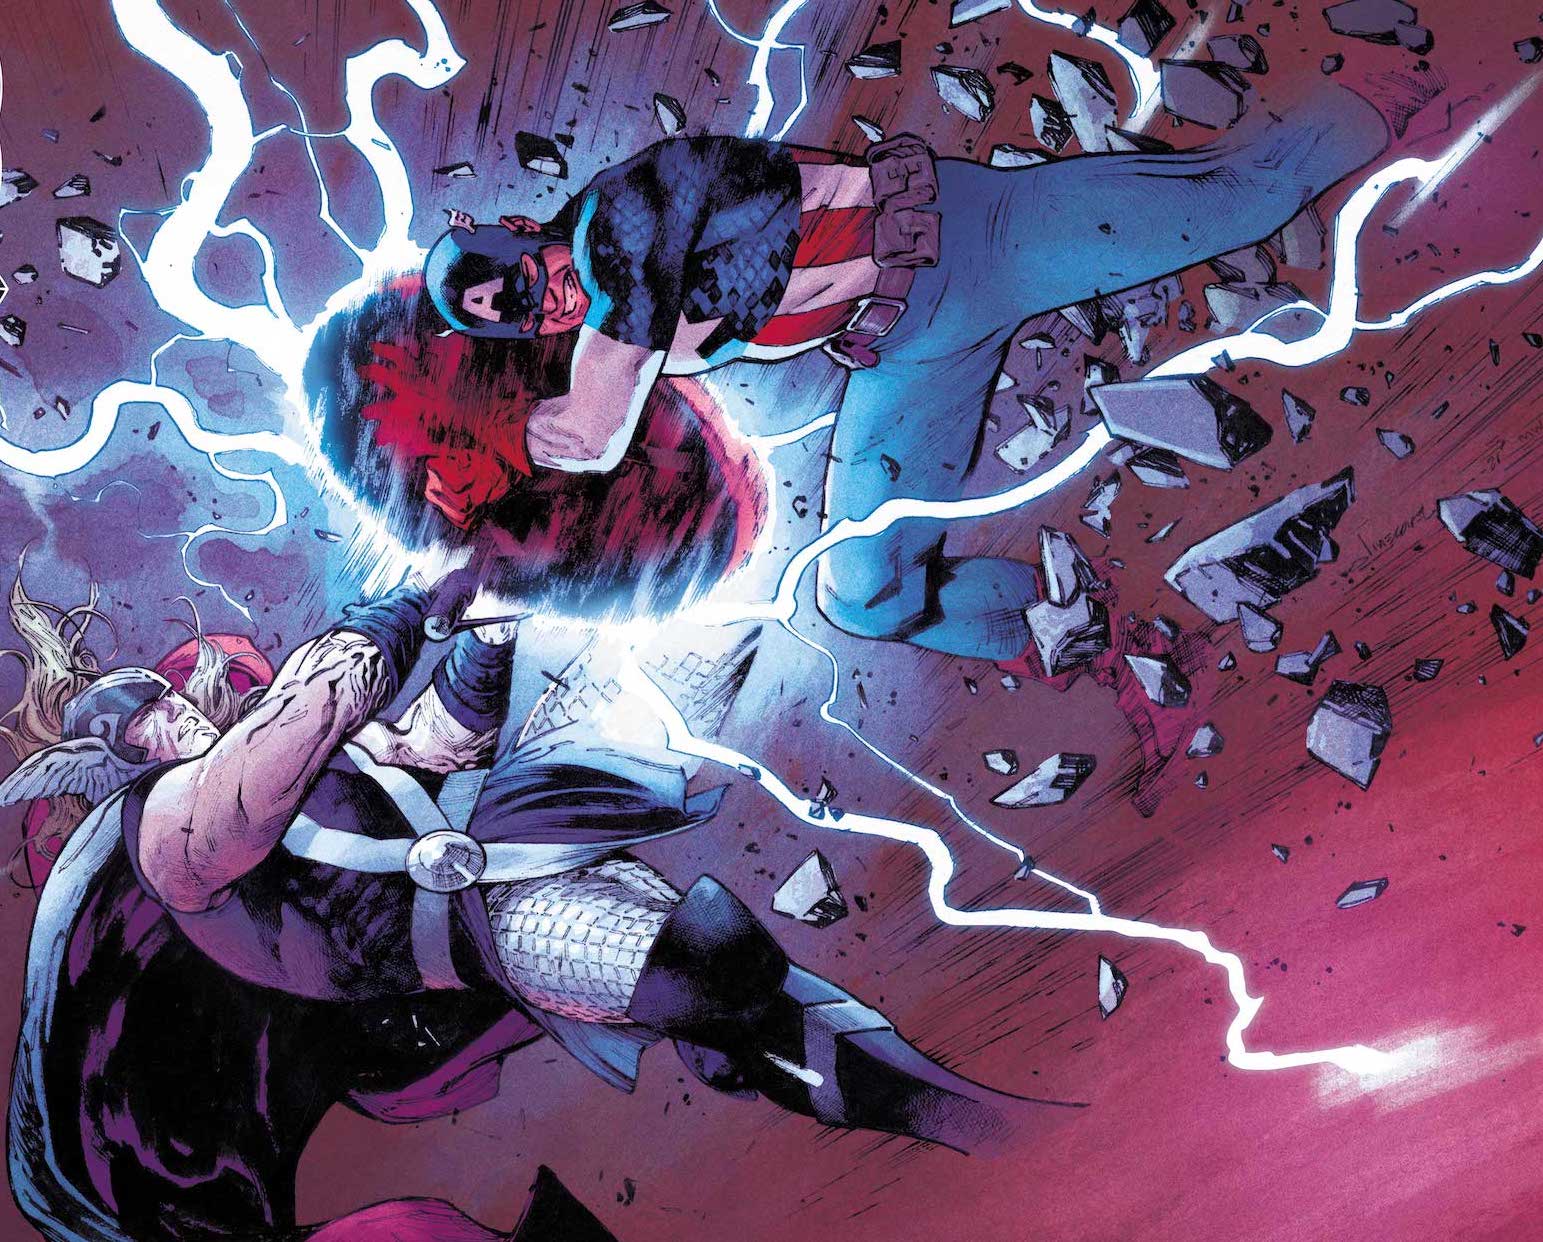 'Thor' #15 adds to the Thor mythos in new ways